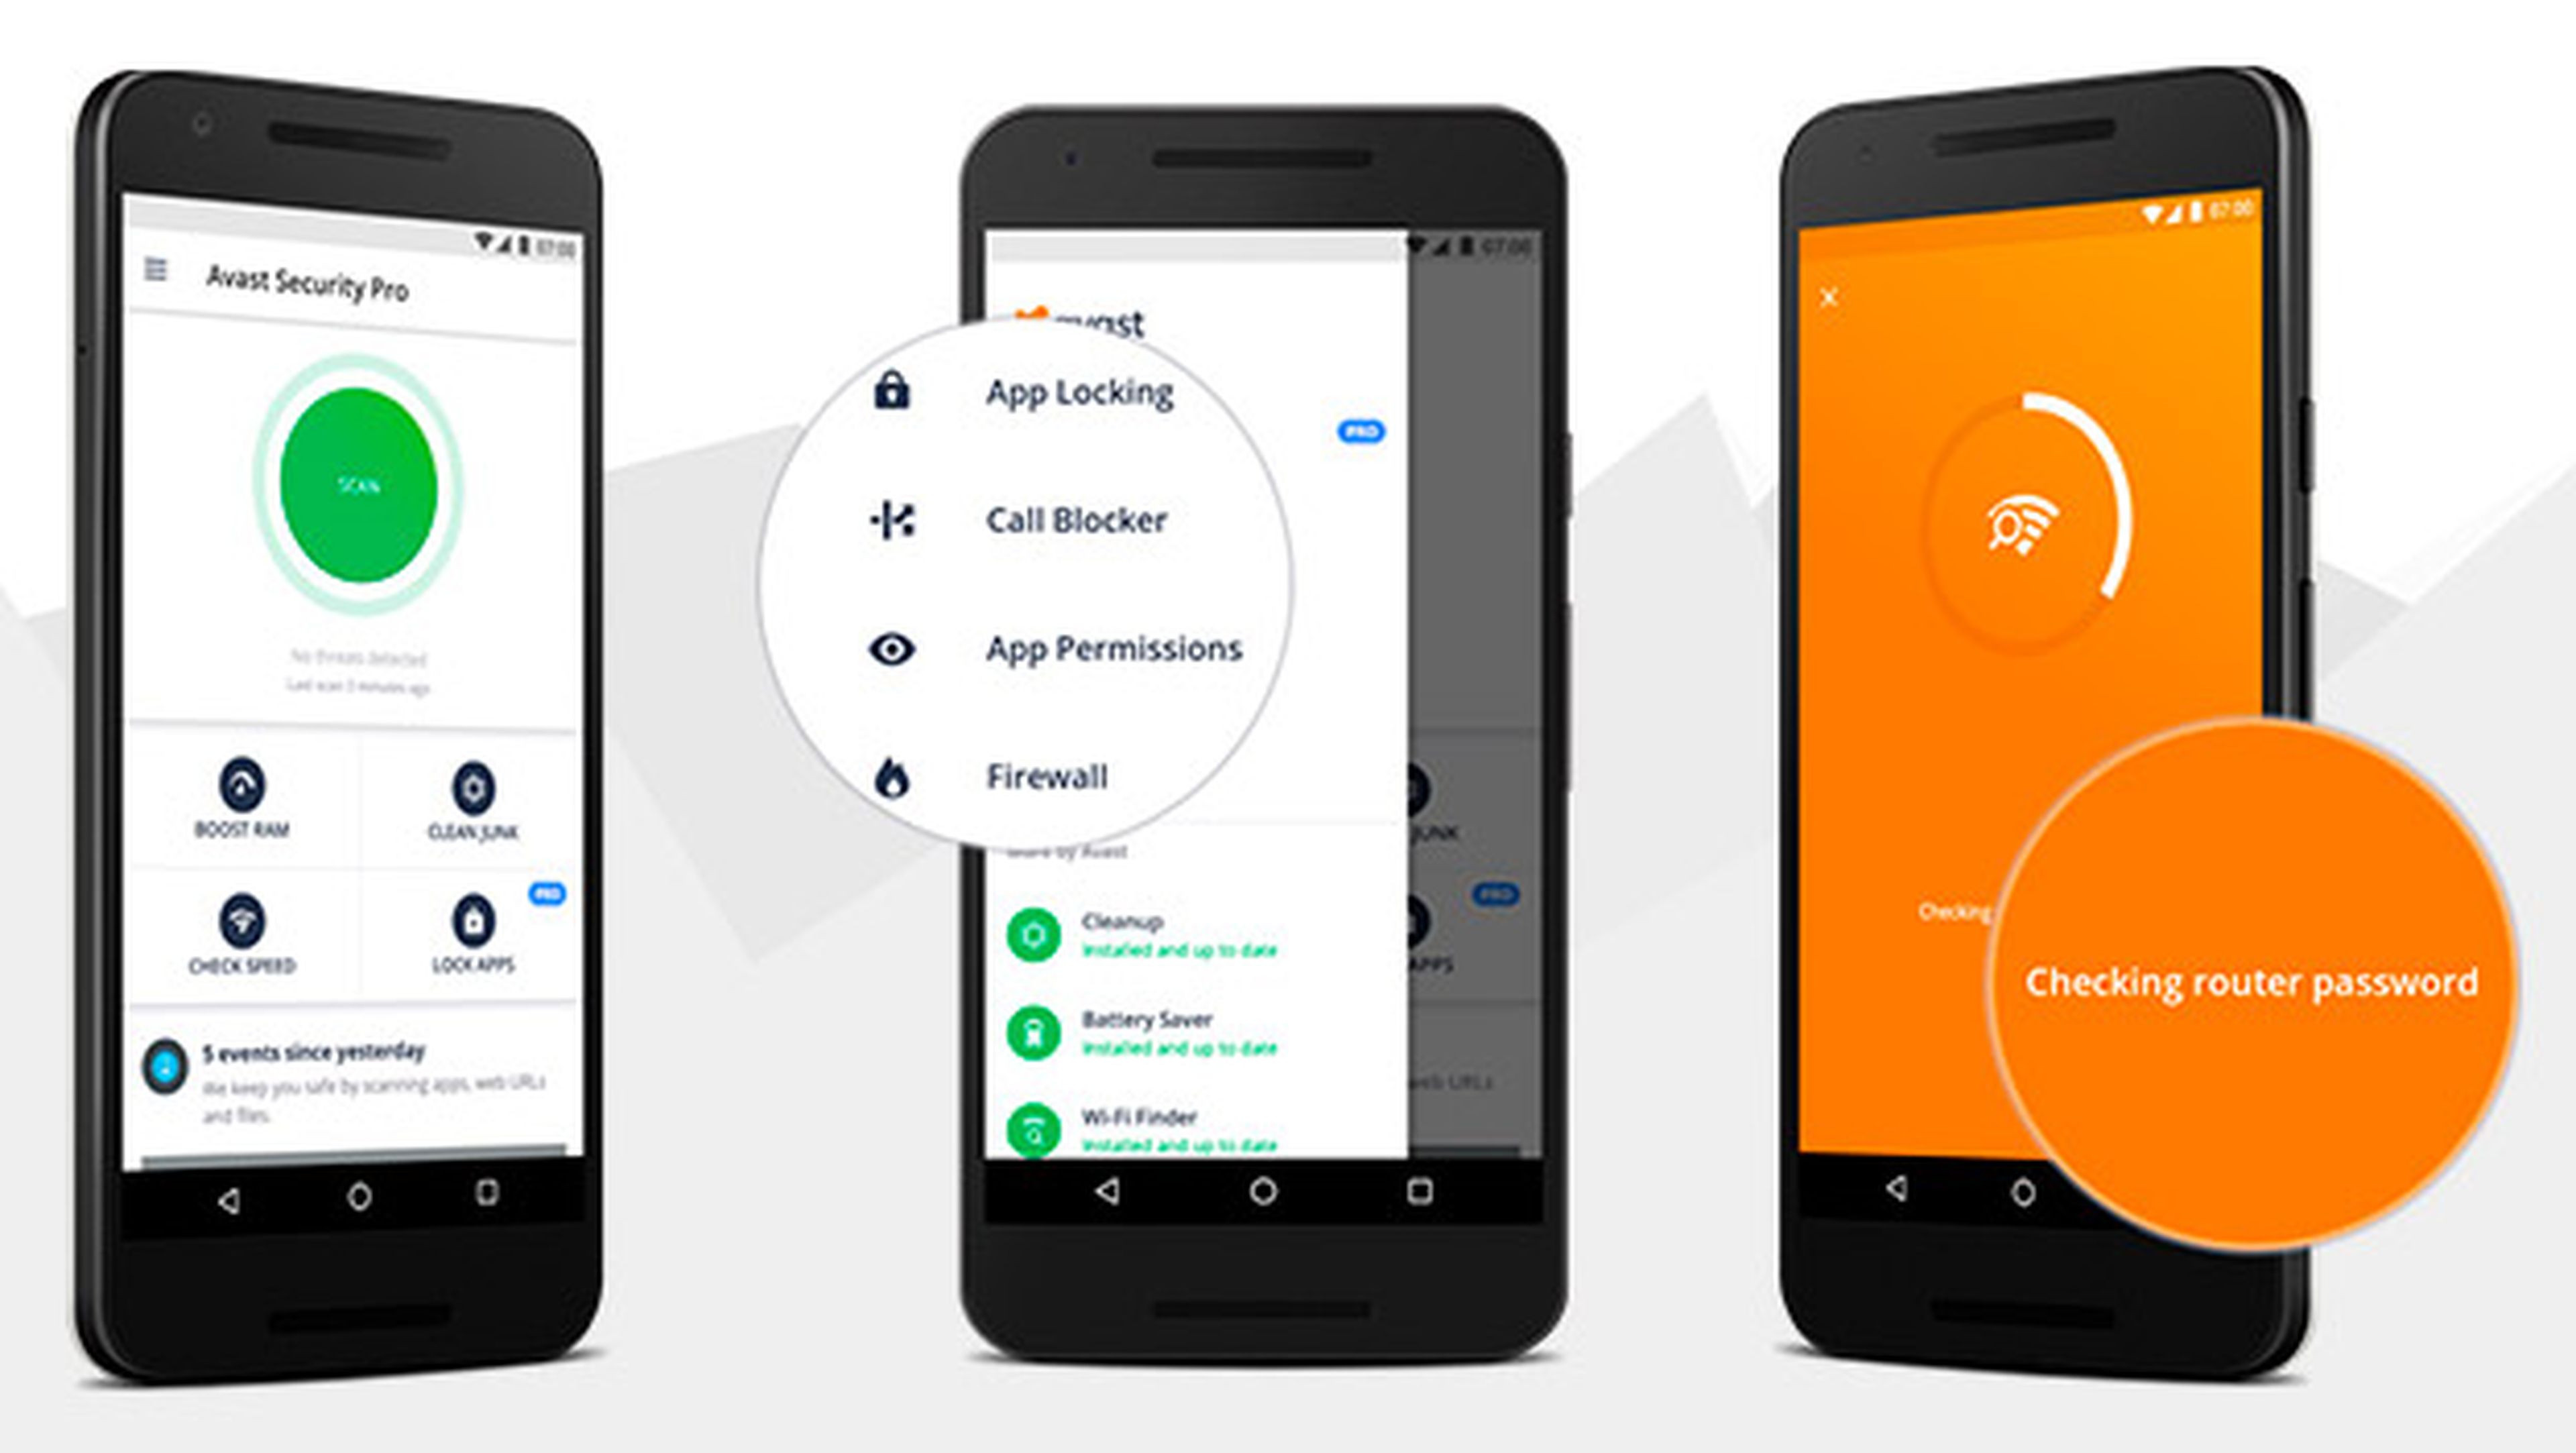 Avast Mobile Security Free